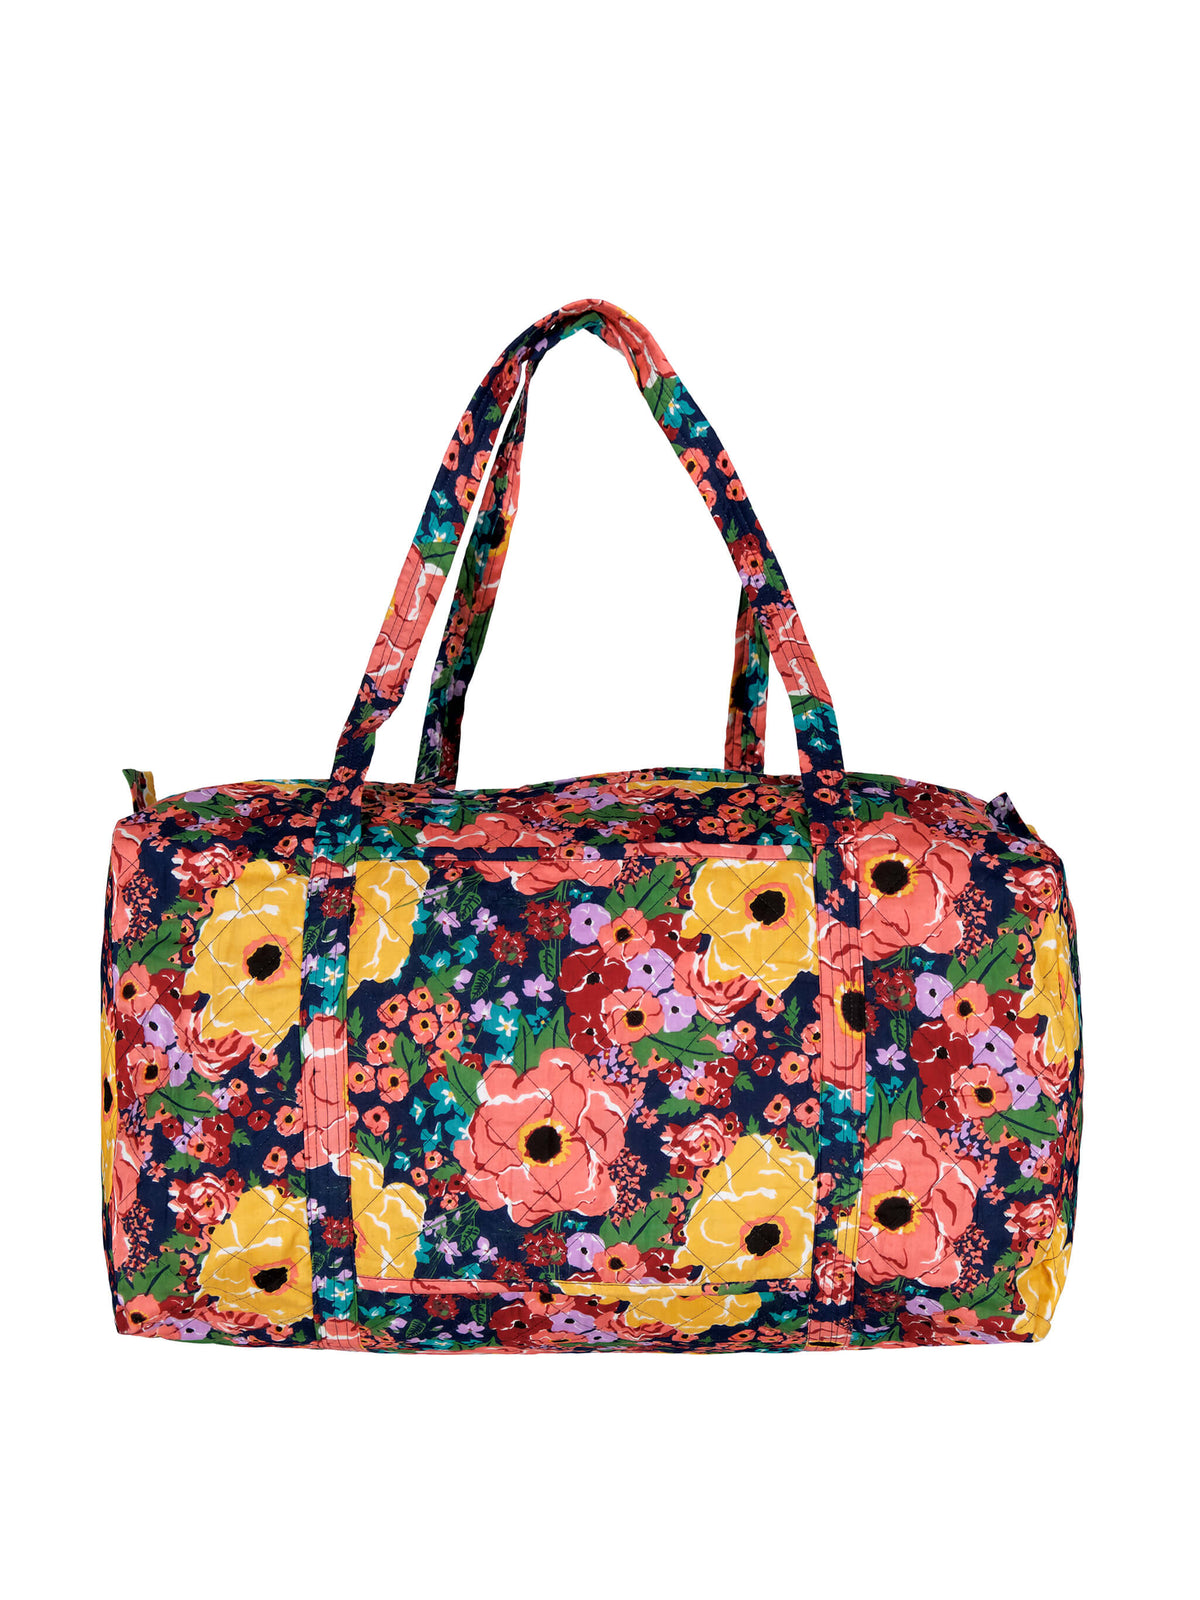 HELEN FLOWER quilted bag